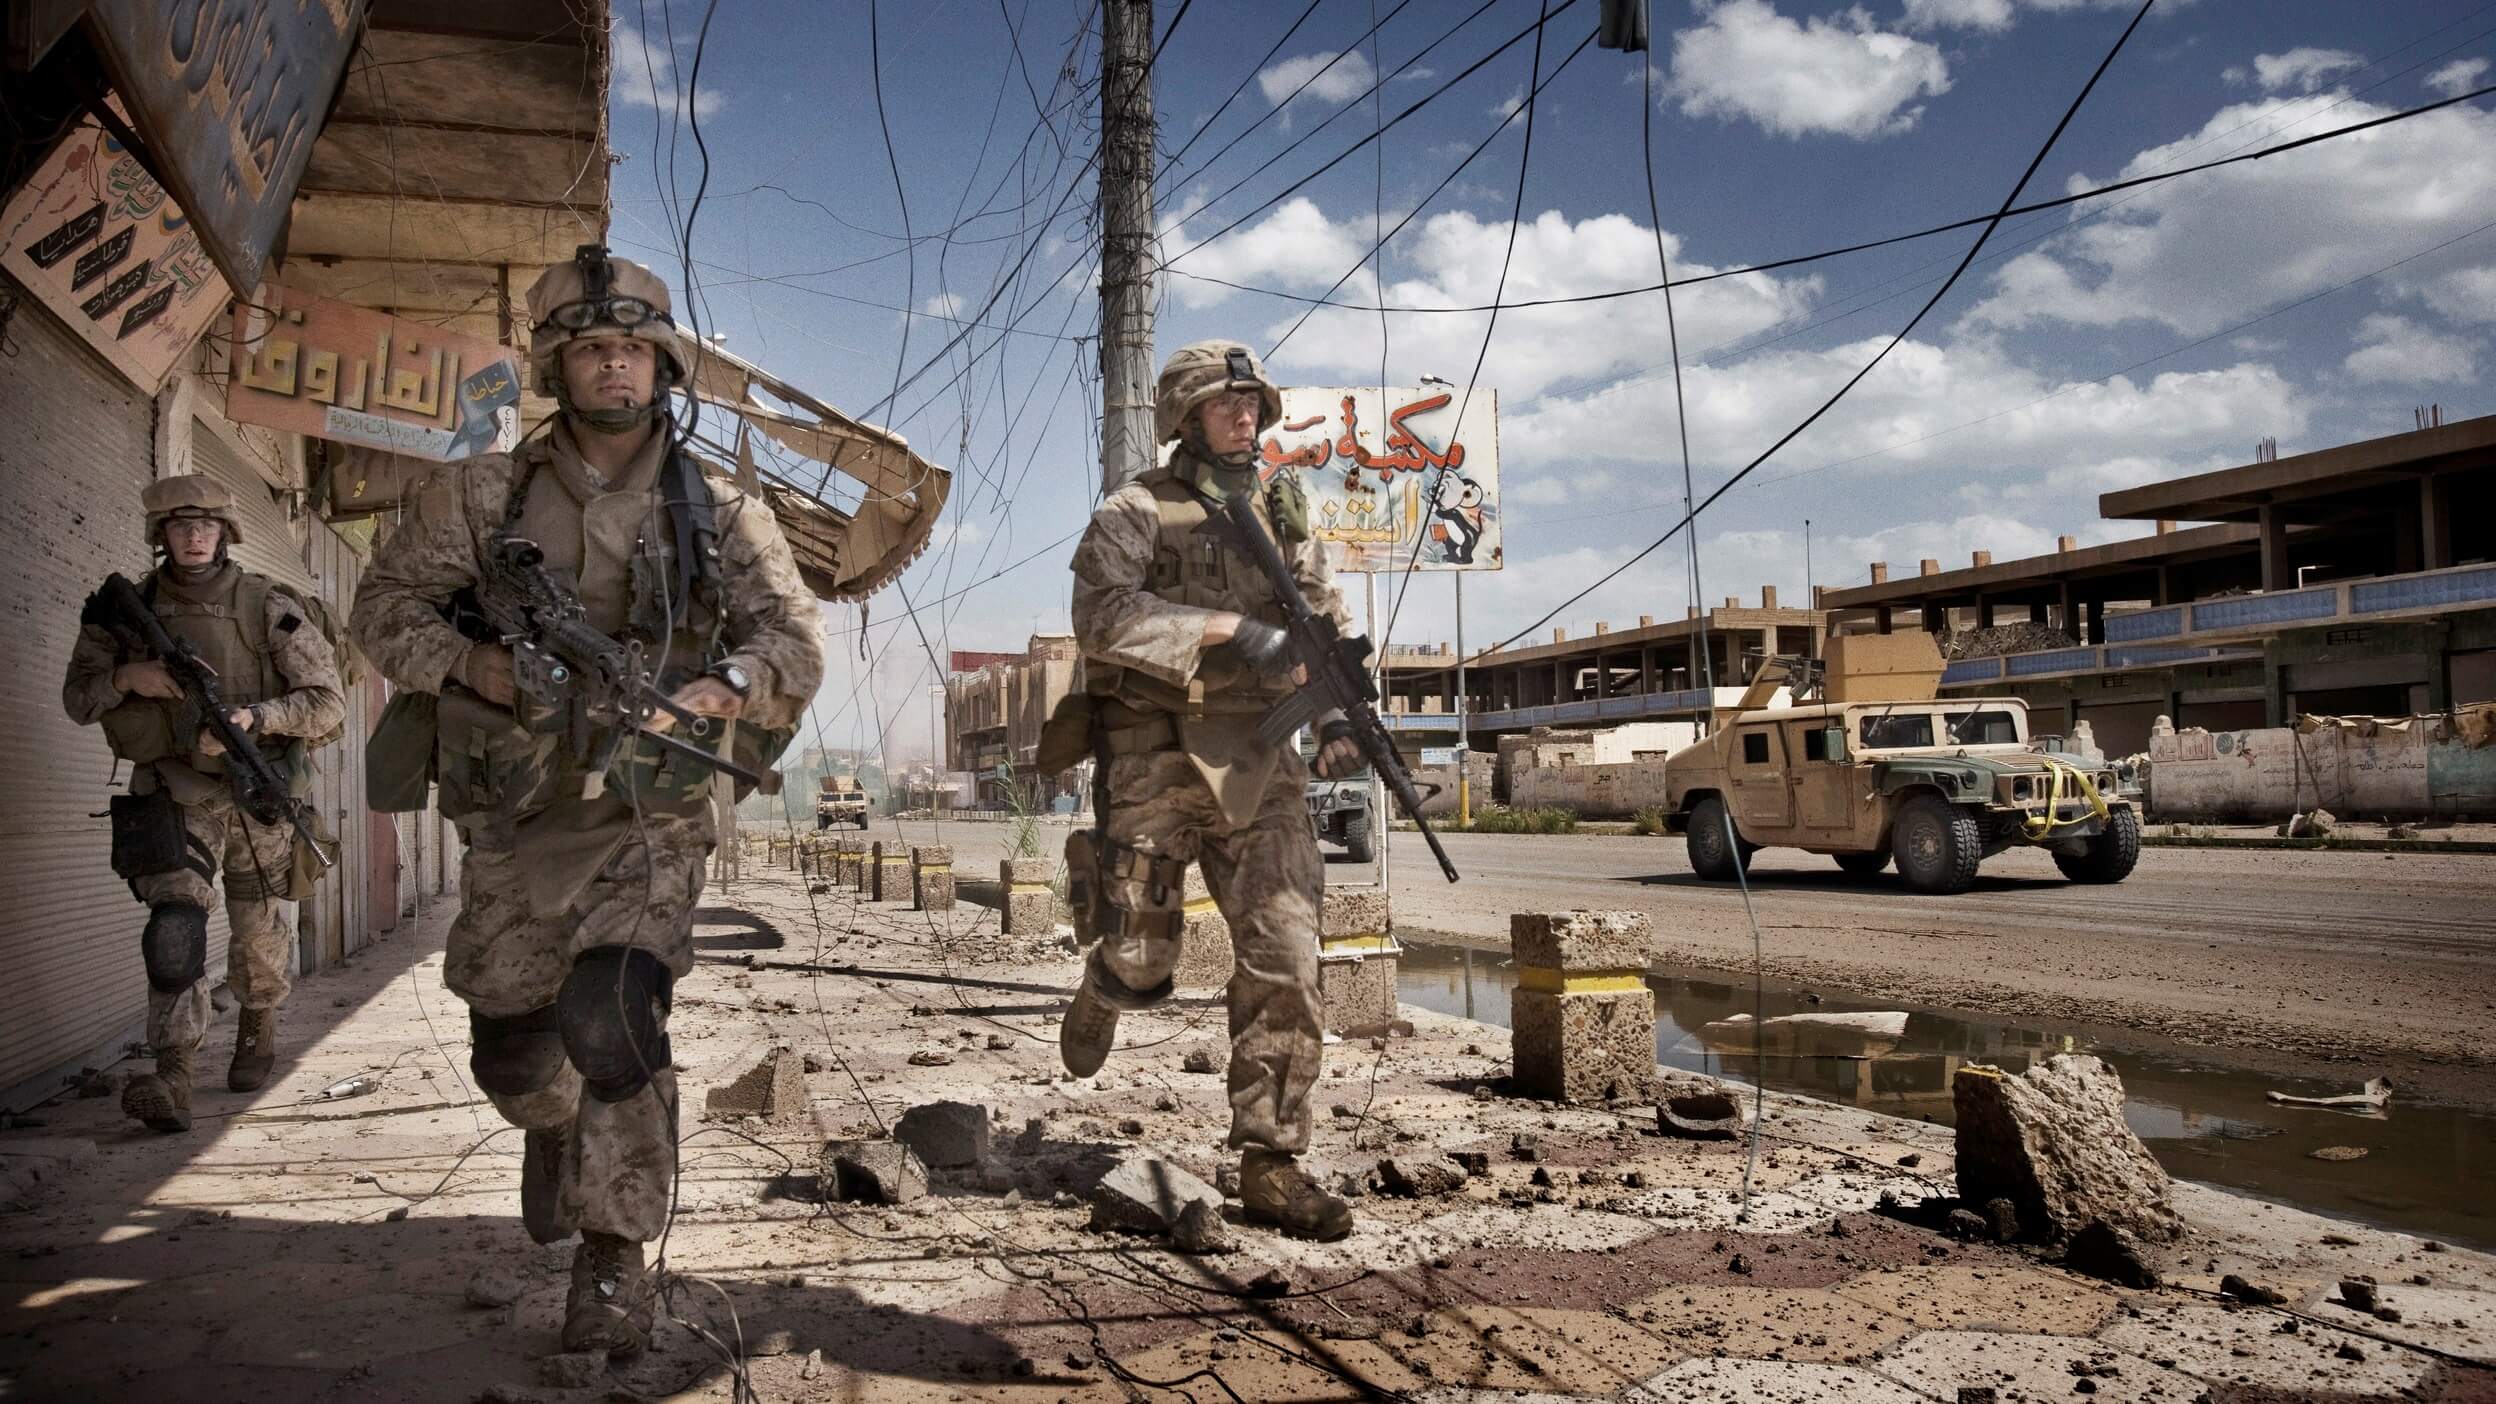 U.S. Marines from the 3rd Battalion, 8th Marine Regiment, Kilo company scan streets and surrounding buildings for insurgents during a patrol in Ramadi, 115 kilometers west of Baghdad. By: Yuri Kosyrev